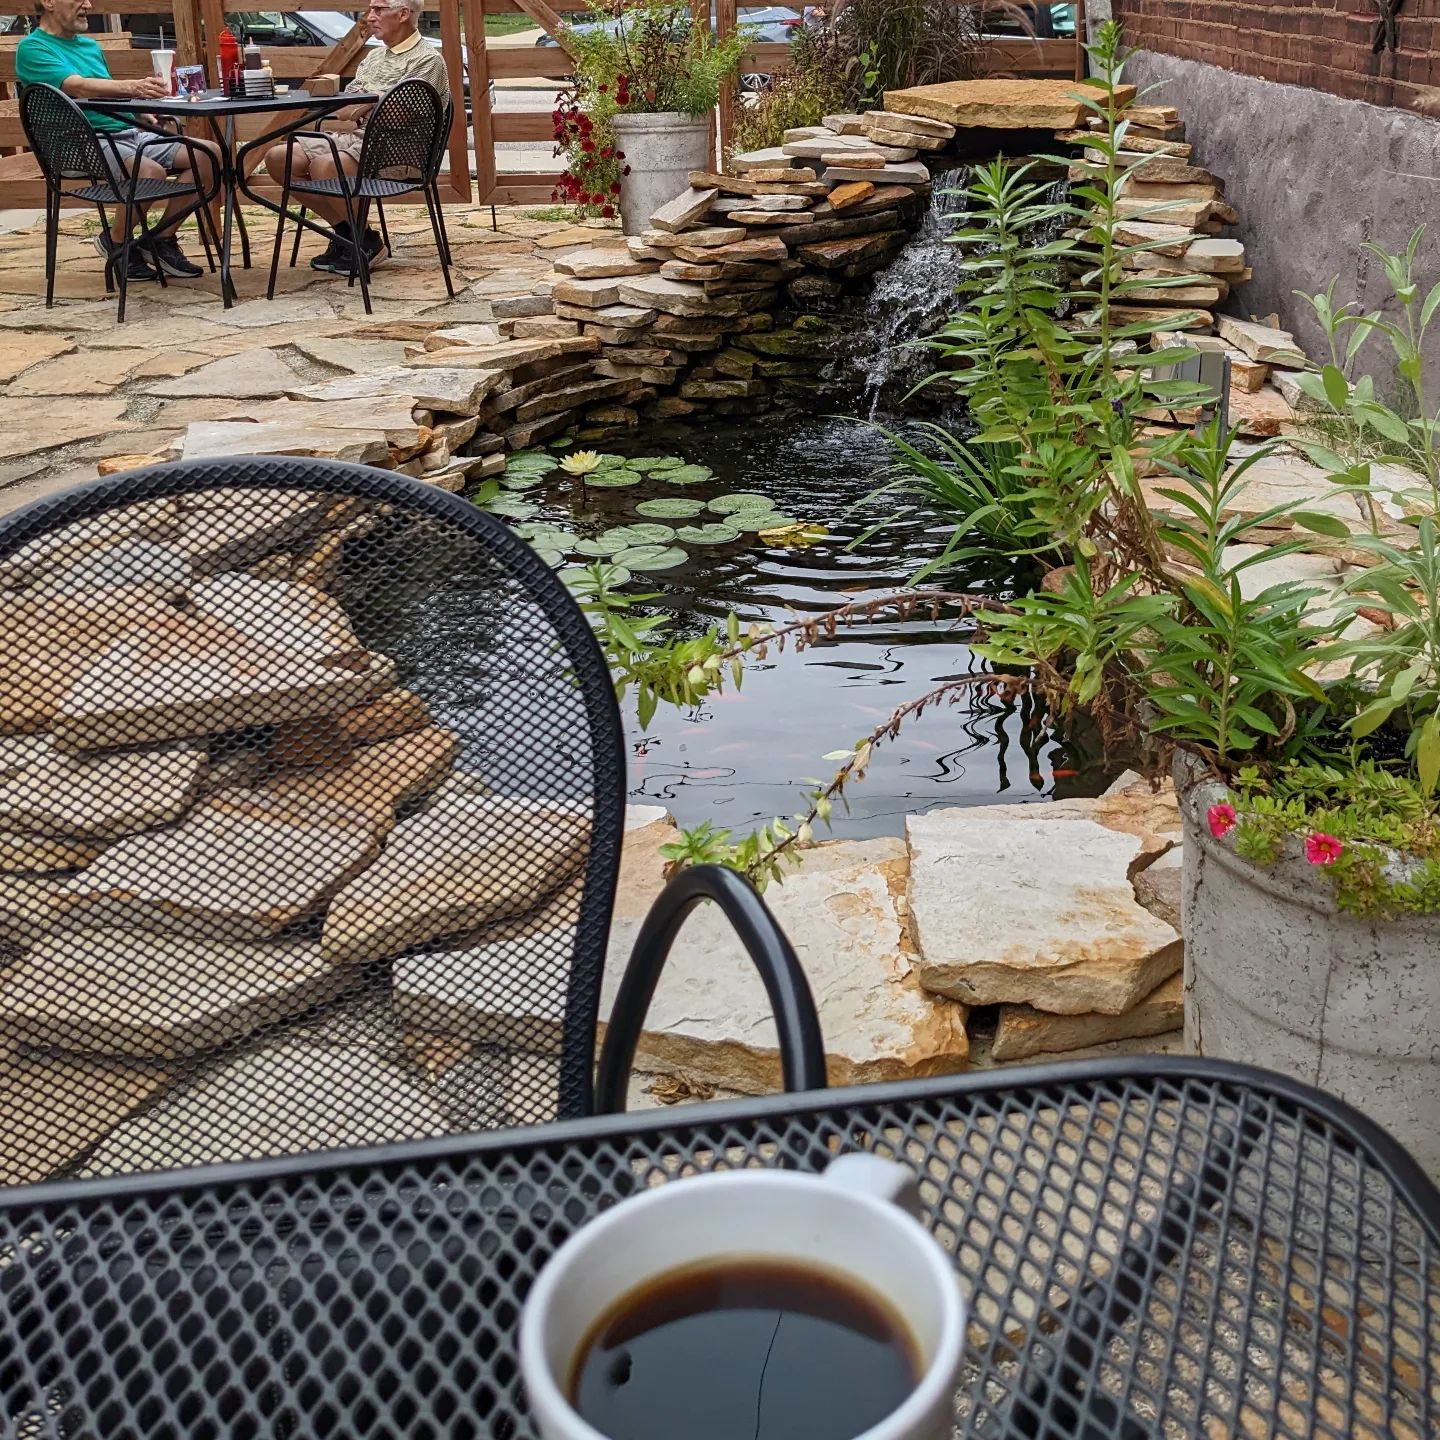 Makes for quite the relaxing spot for a bit of brunch on a Friday #haveacowcattlecompany #stlouis #citylife